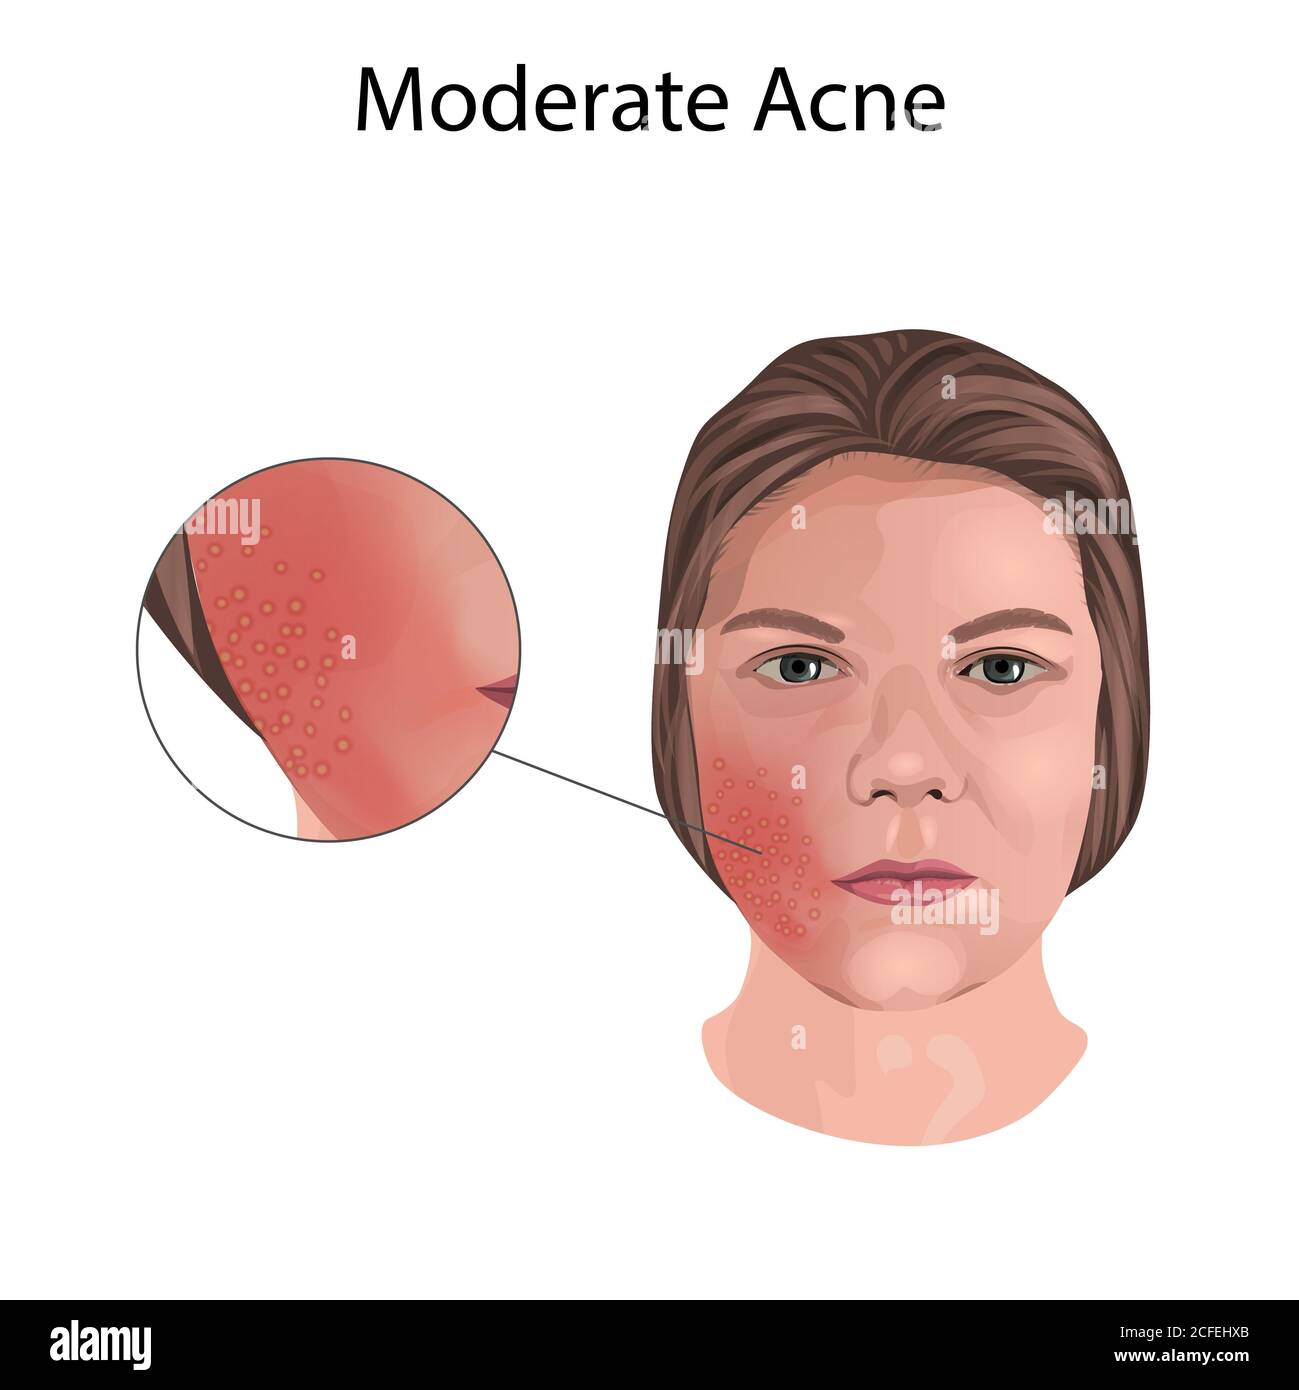 Moderate acne, illustration. Close-up view Stock Photo